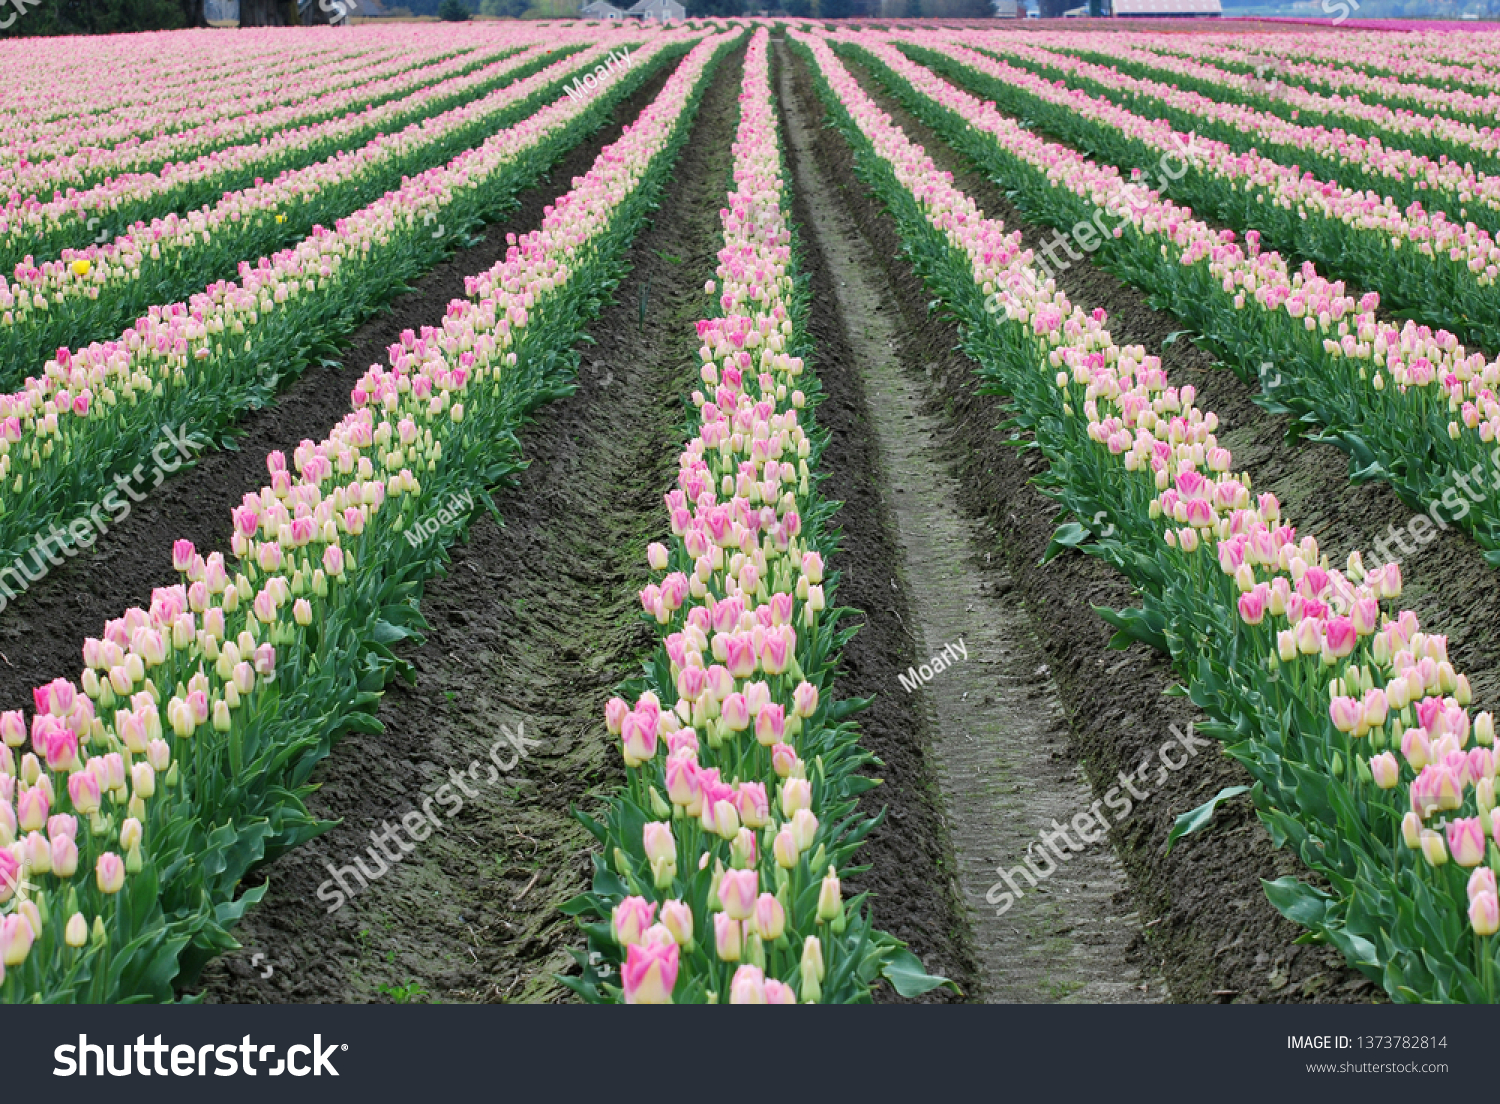 Rows of pink and white Dynasty tulips in a field in Mount Vernon, Washington during the Skagit Valley Tulip Festival #1373782814